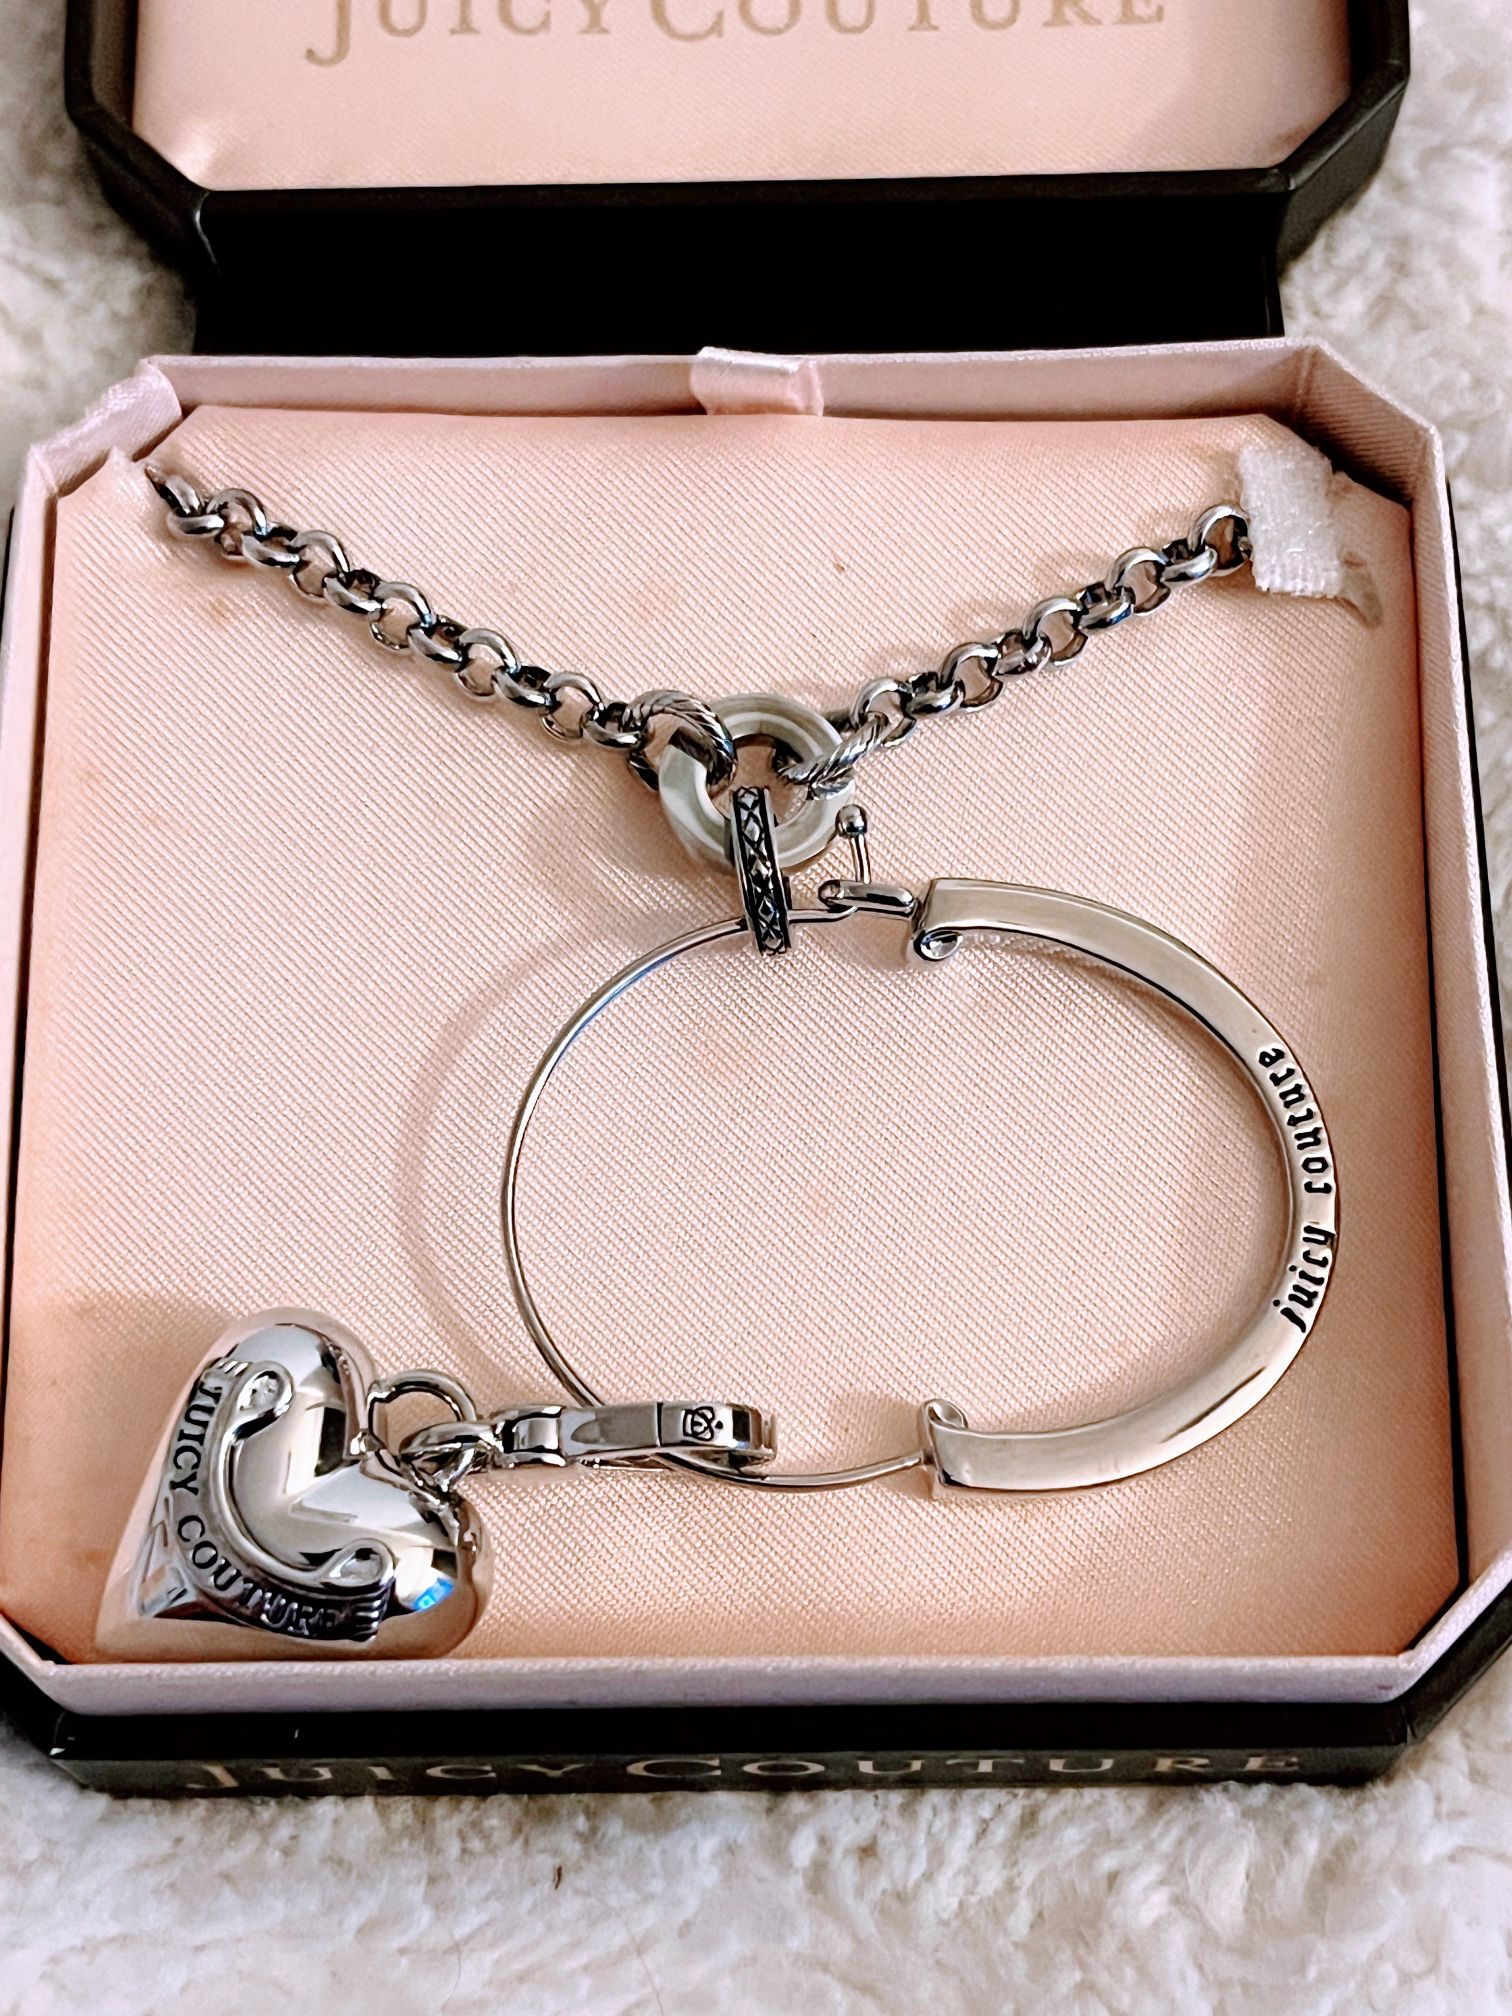 Juicy Couture Charm Holder Necklace with Heart Charm Retired 